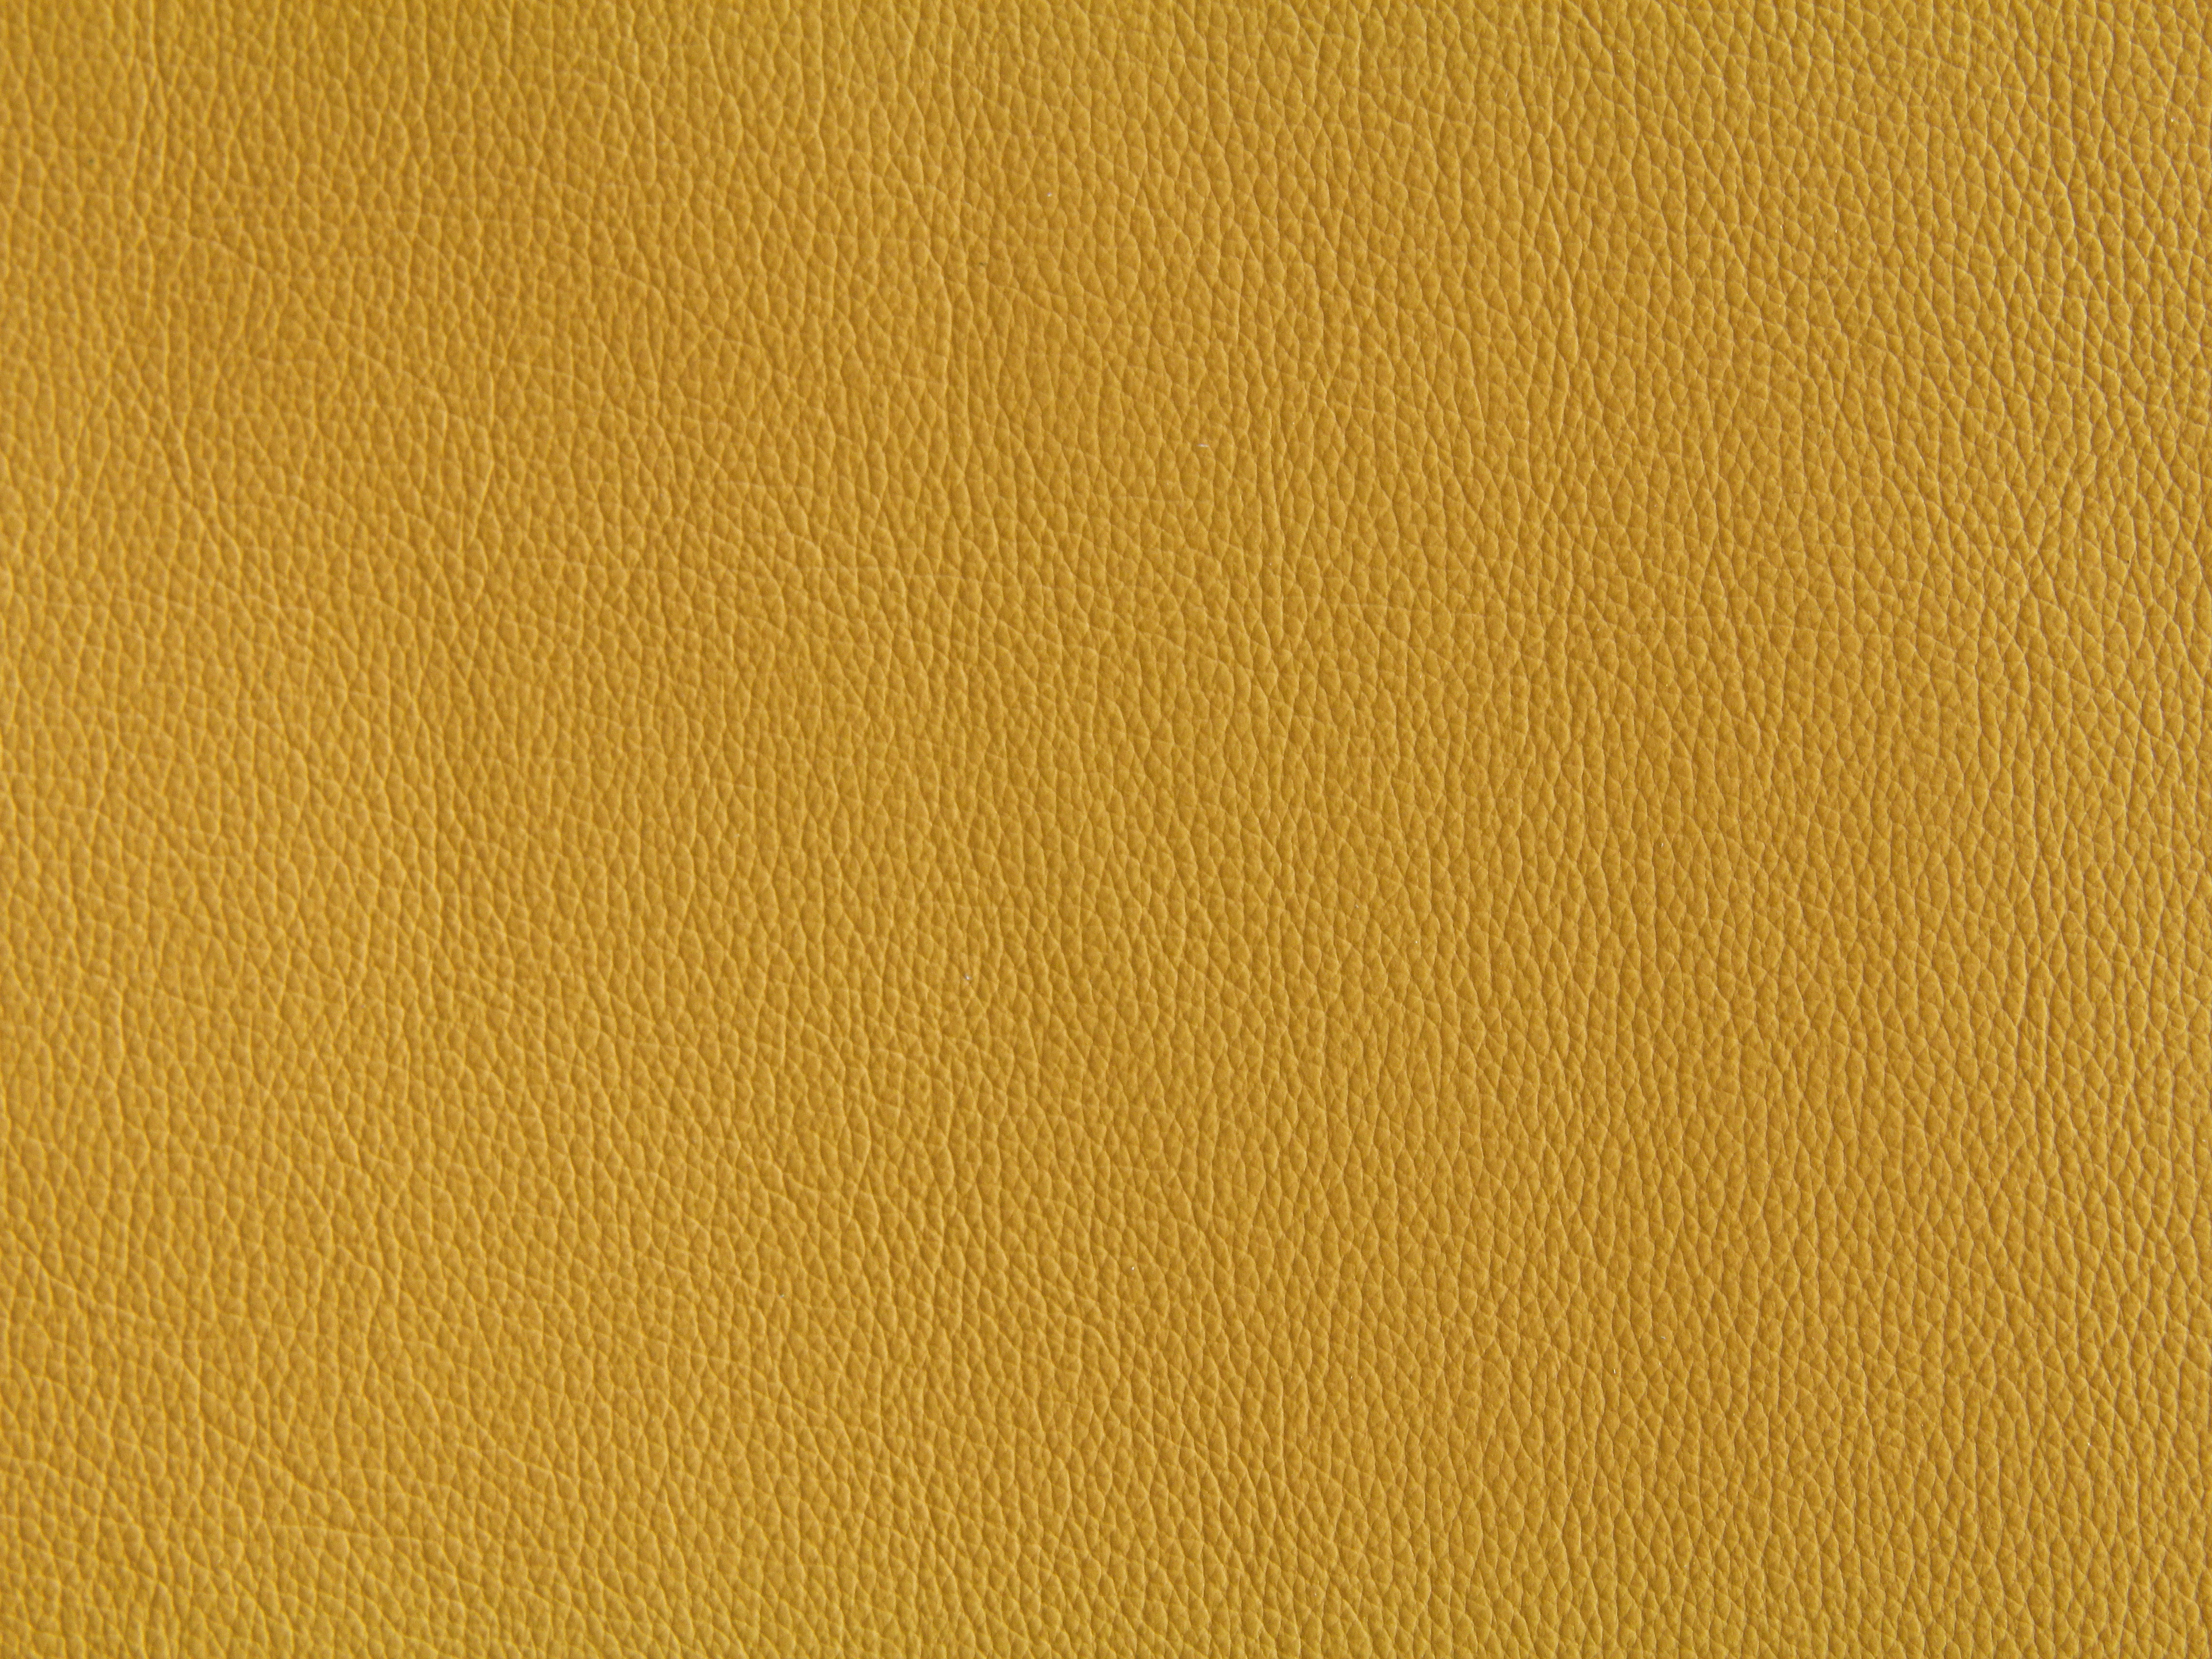 Yellow Leather Texture Wallpaper Fabric Material Design Bright